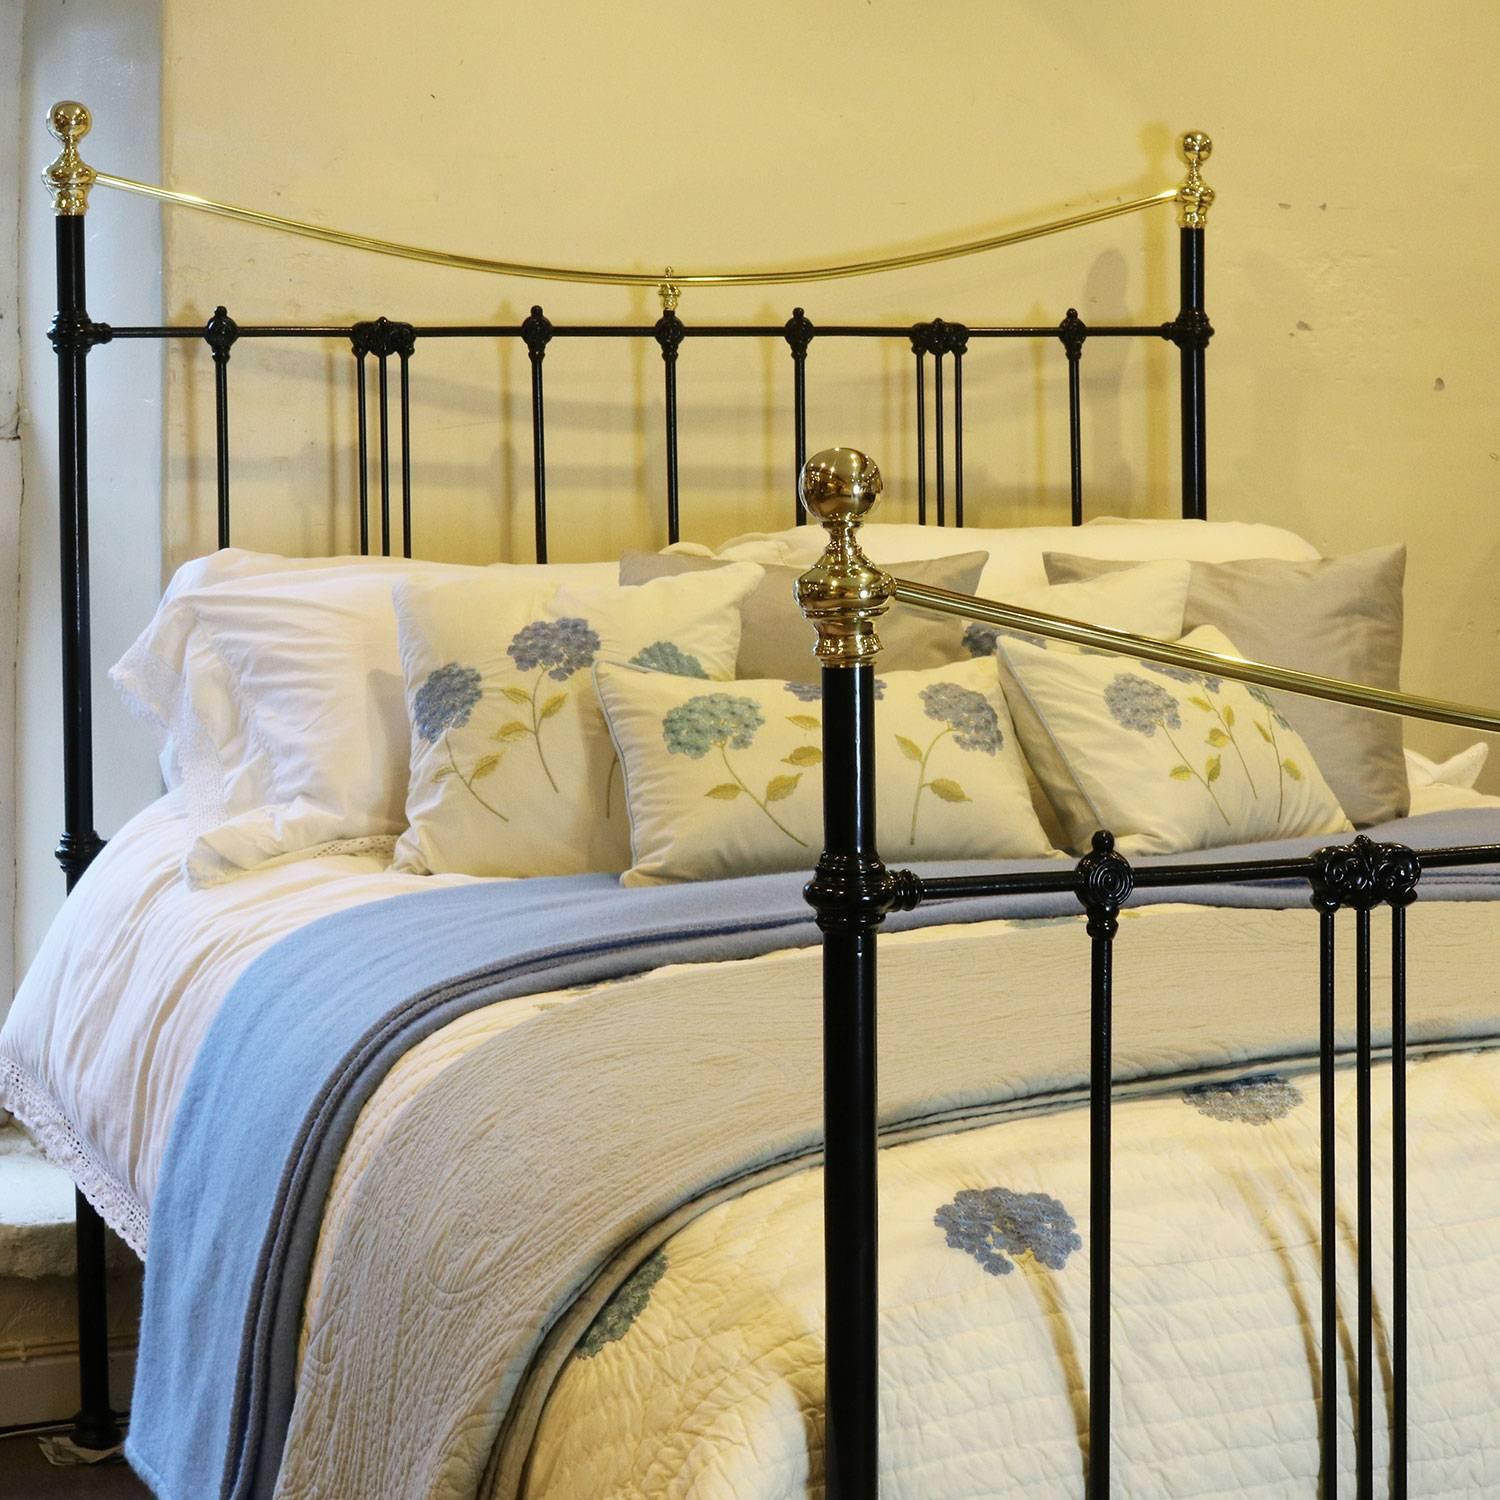 A brass and iron bed finished in black with a curved brass top rail and Art Nouveau castings.

This bed accepts an American Queen or British king-size (60 inches, 5ft or 150cm) base and mattress set.

The price is for the bed frame alone. The